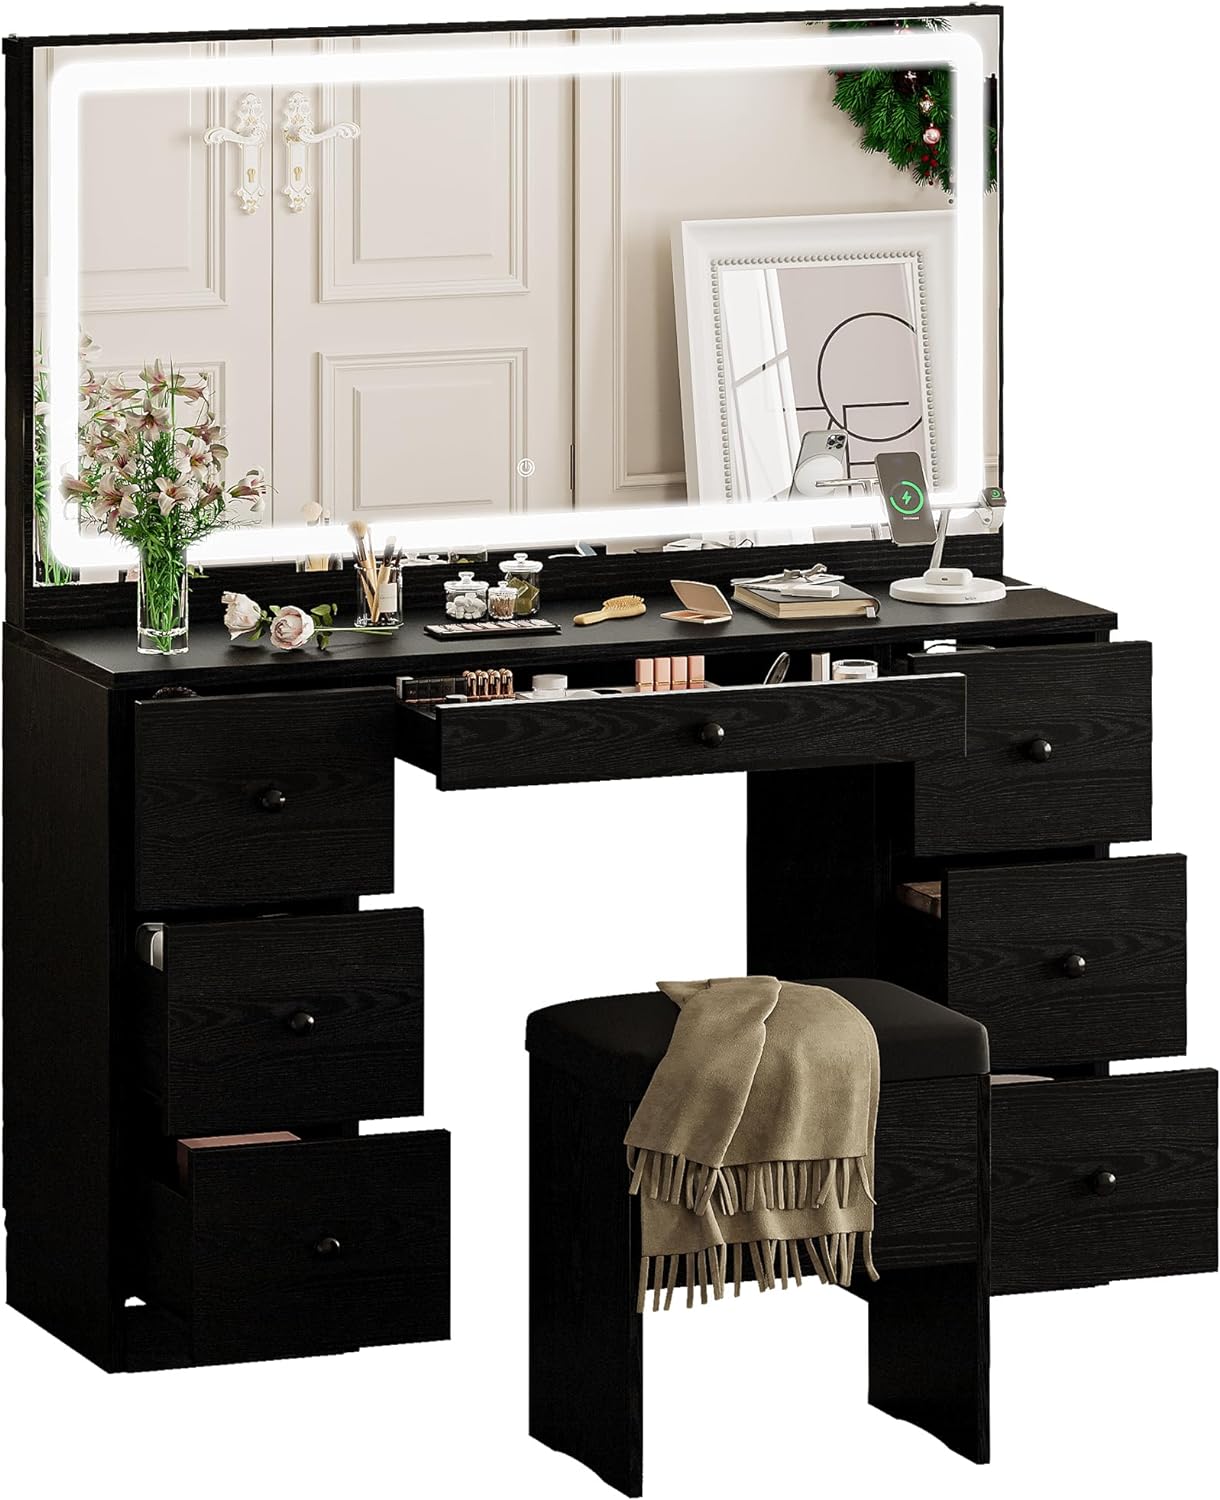 IRONCK Vanity Makeup Desk Set with LED Lighted Mirror & Power Outlet, 7 Drawers Bedroom Vanities Table with Stool,Black